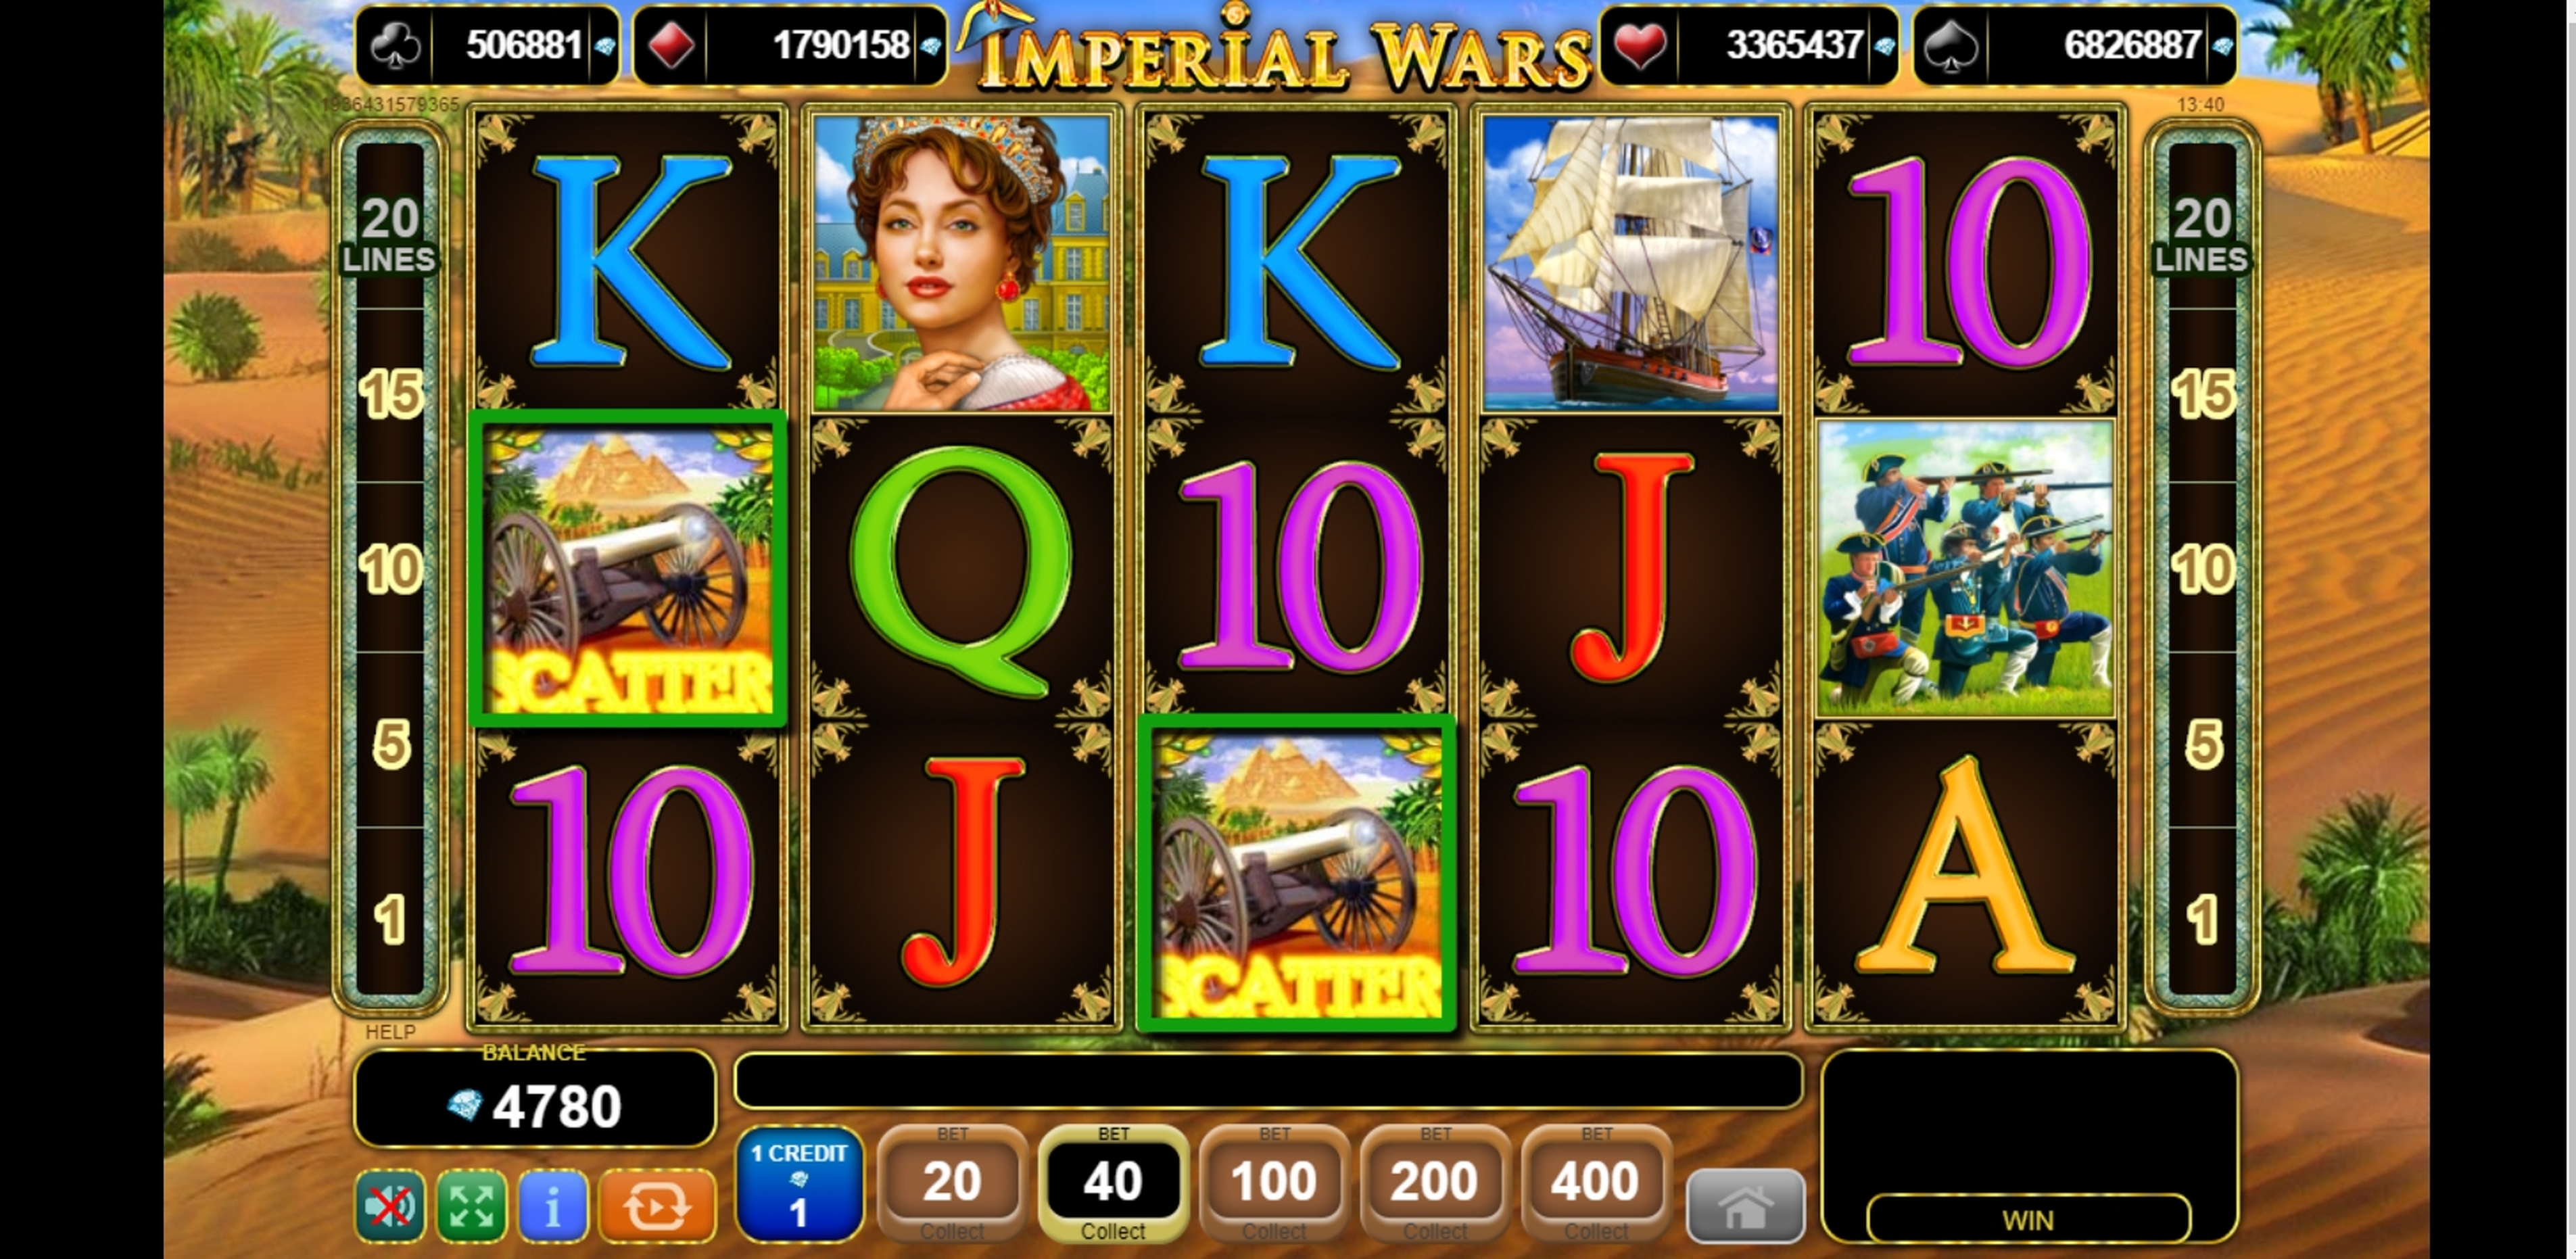 Win Money in Imperial Wars Free Slot Game by EGT